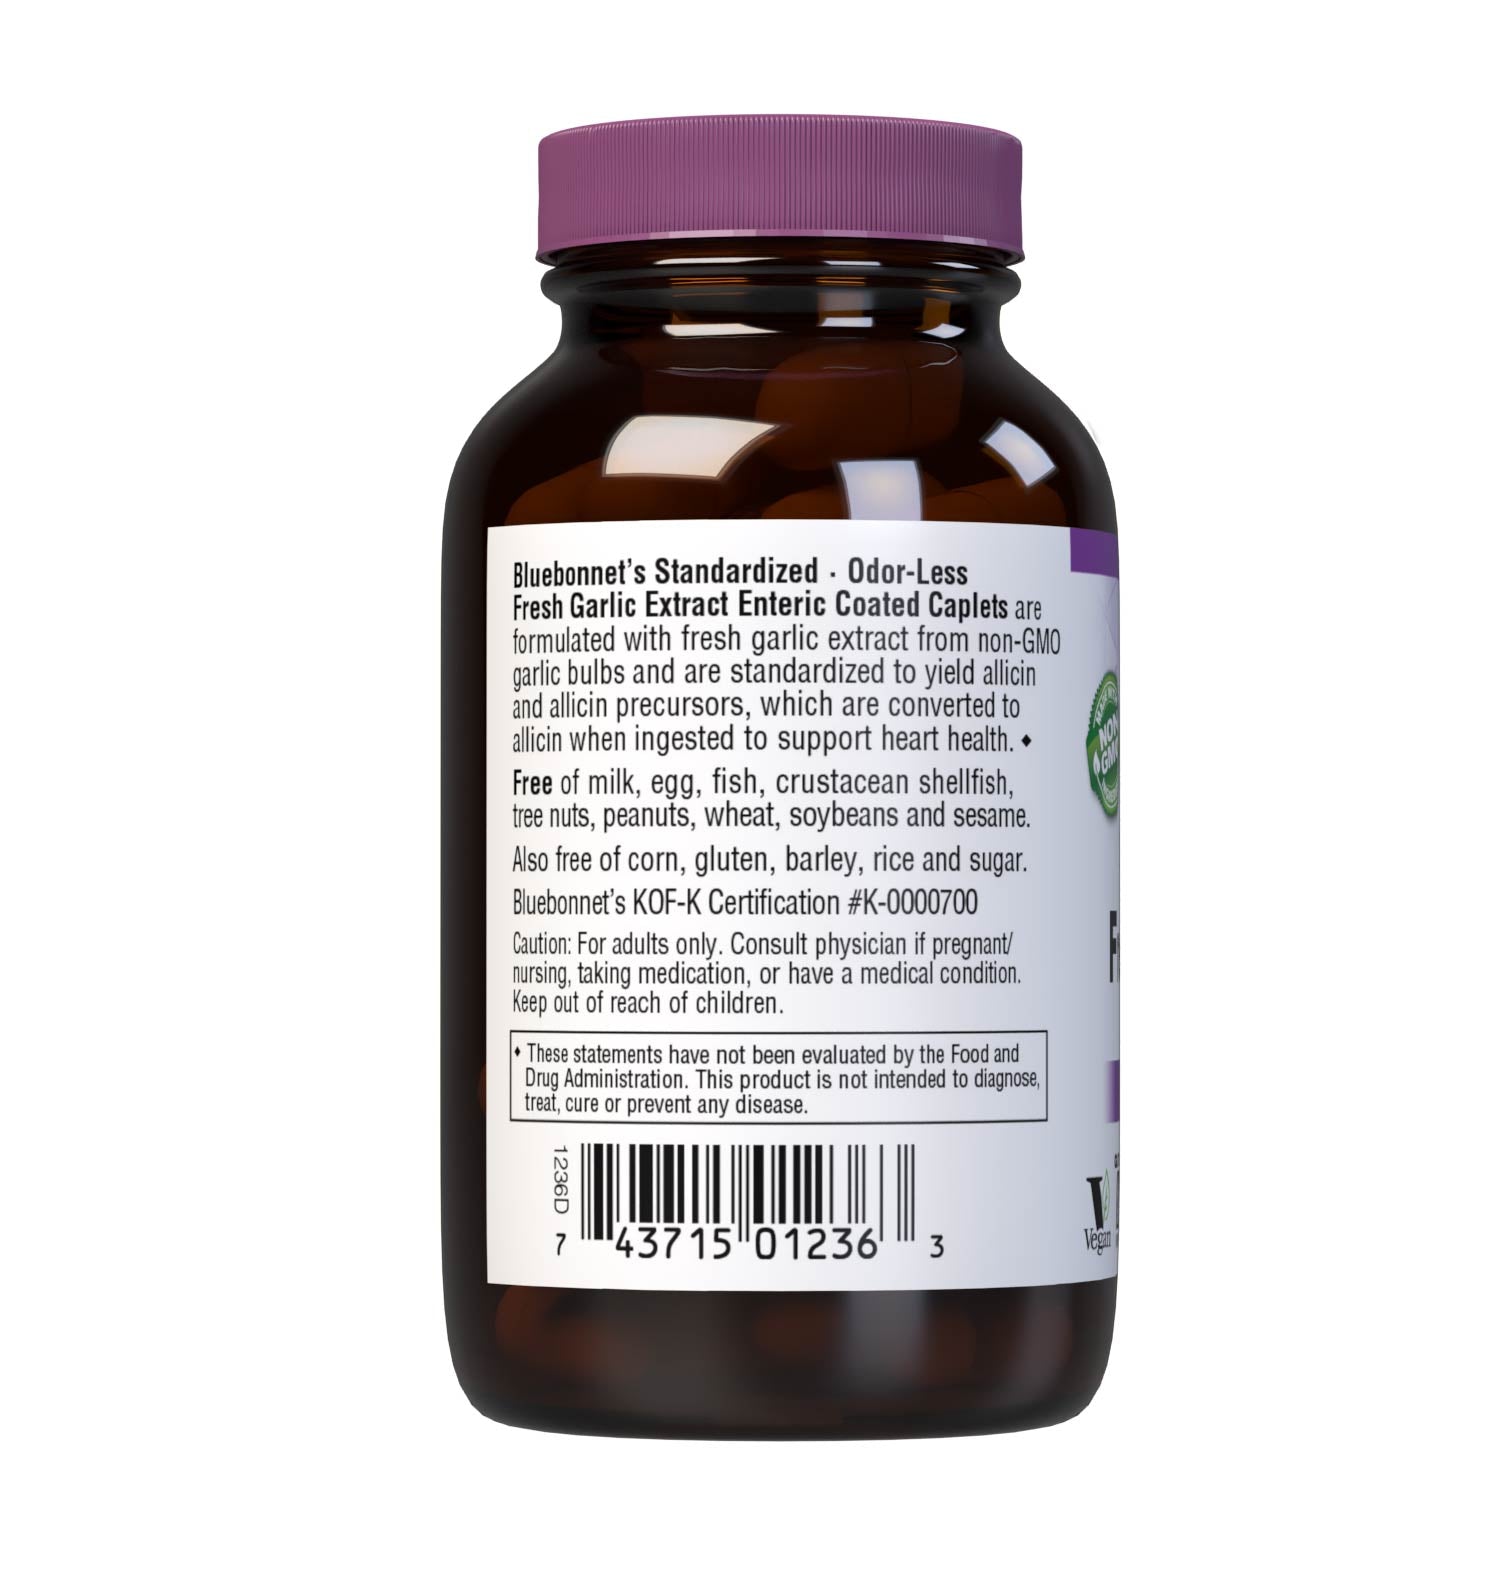 Bluebonnet’s Standardized Odor-Less Fresh Garlic Extract 60 Enteric Coated Caplets are formulated with fresh garlic extract from non-GMO garlic bulb and are standardized to yield allicin and allicin precursors, which are converted to allicin when ingested to support heart health. Description panel. #size_60 count